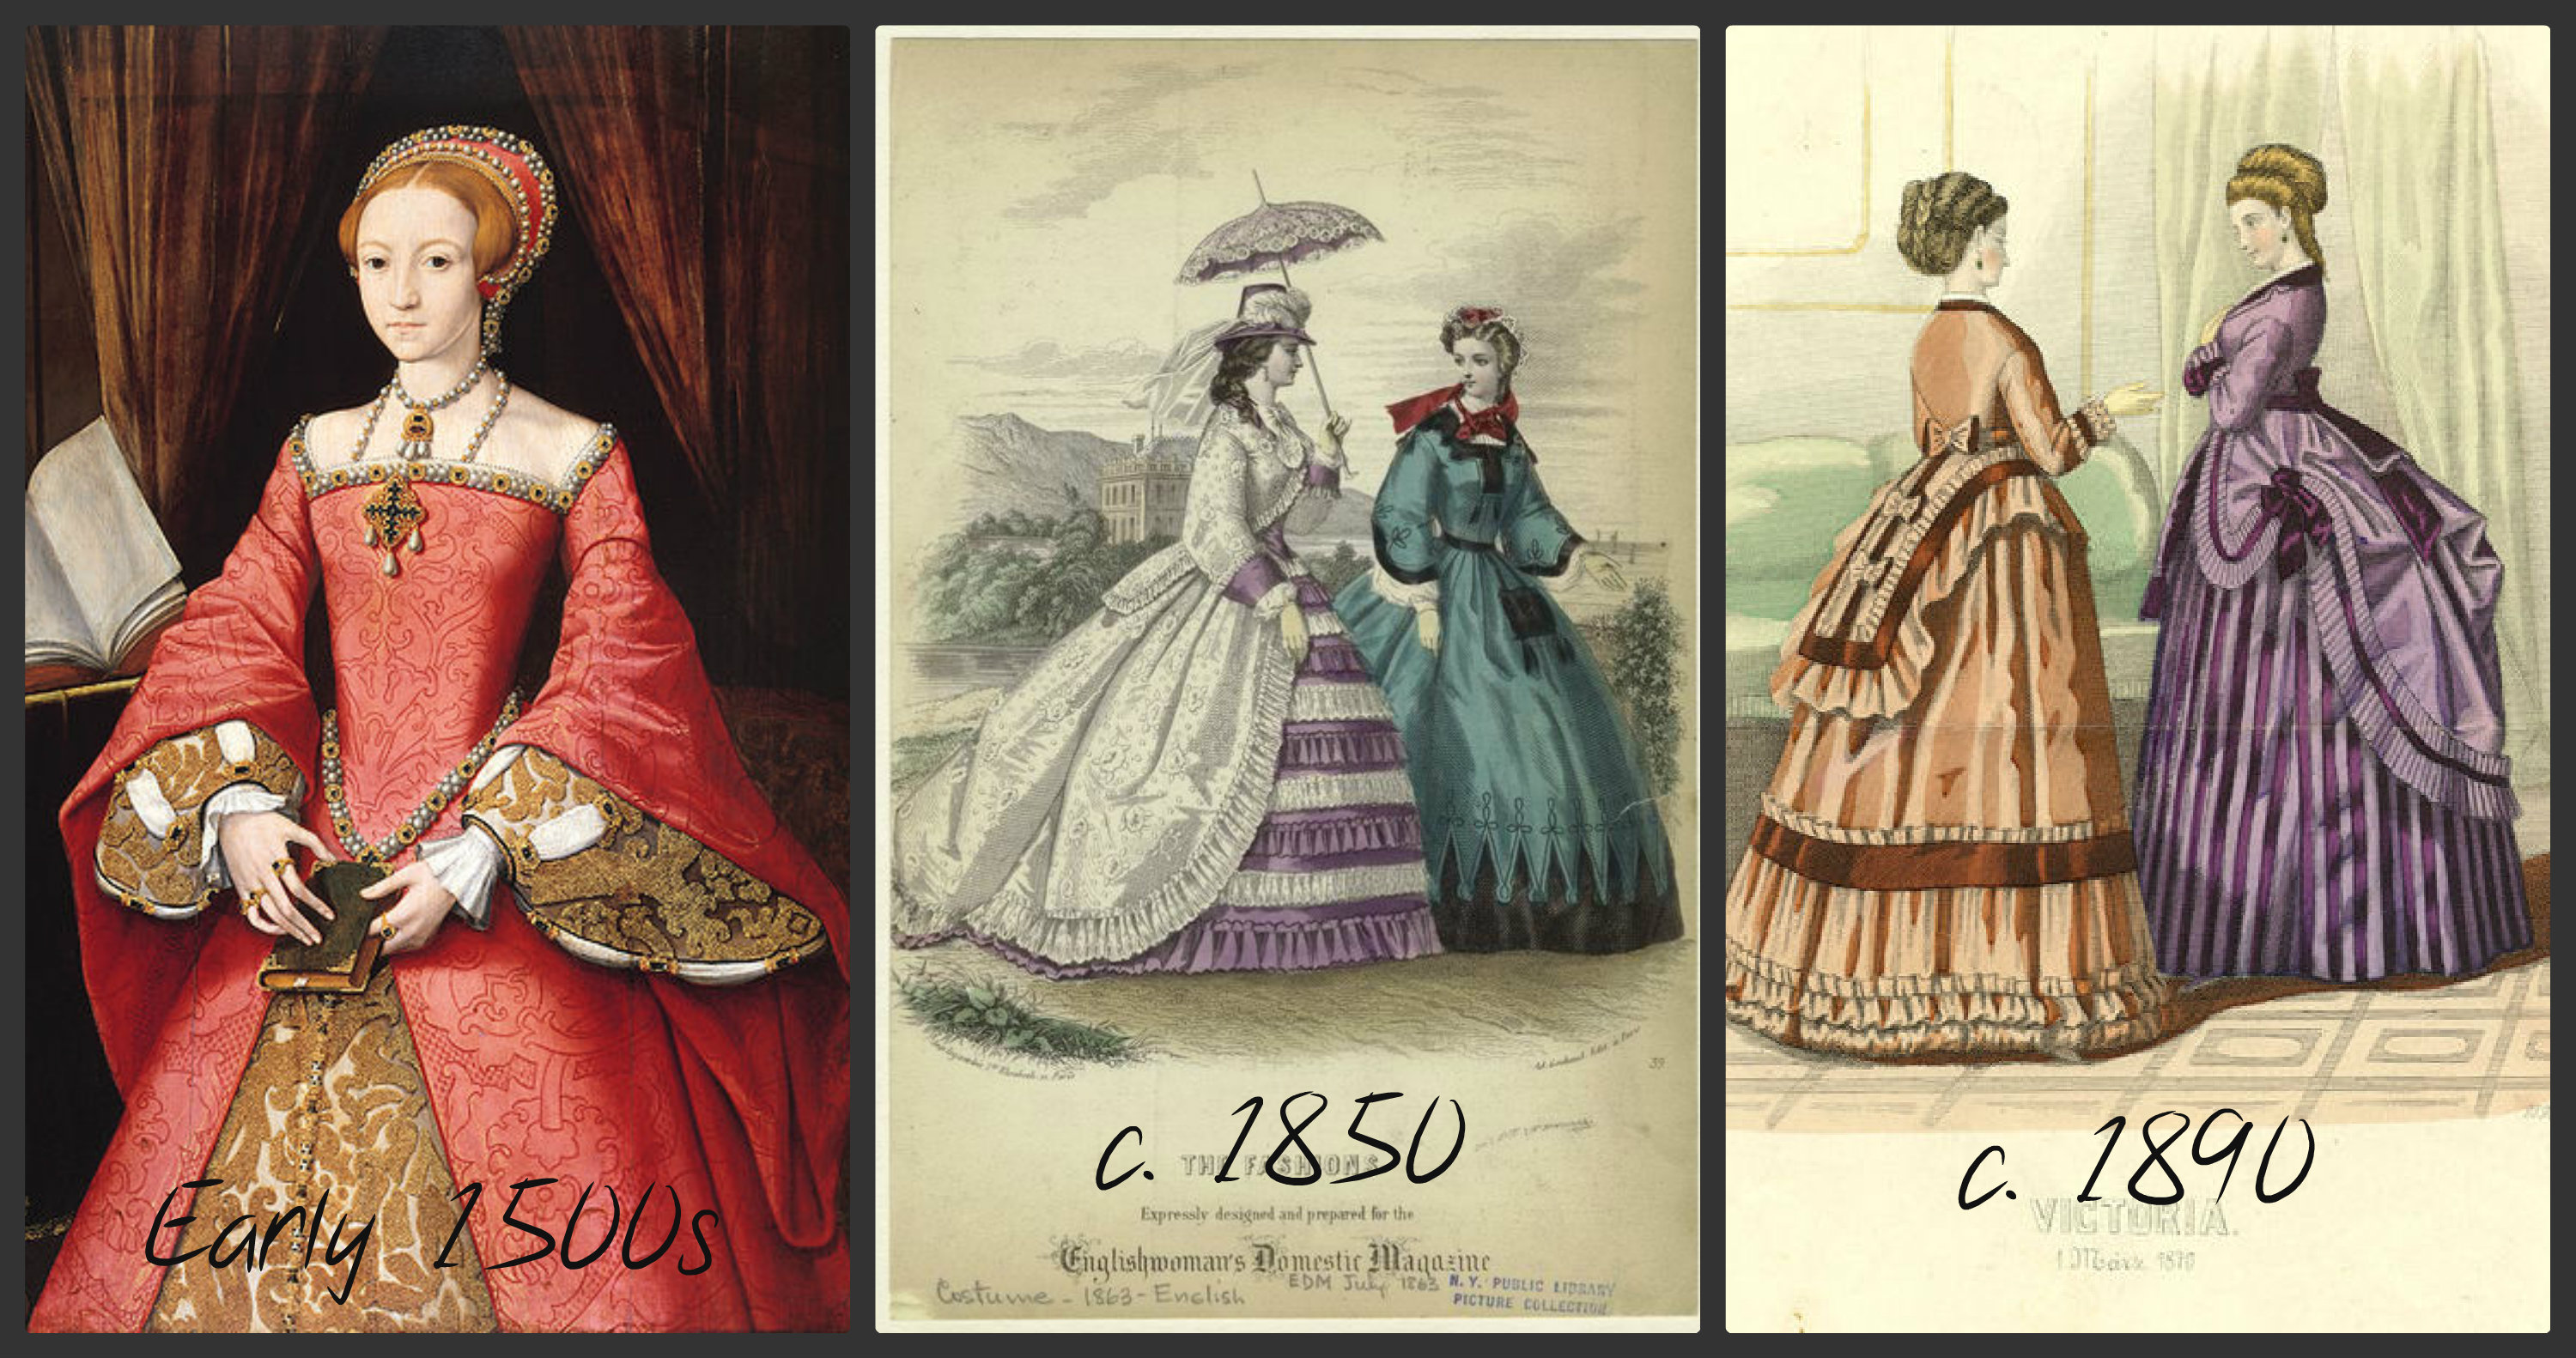 Is there really any difference between Tudor and Victorian clothing?